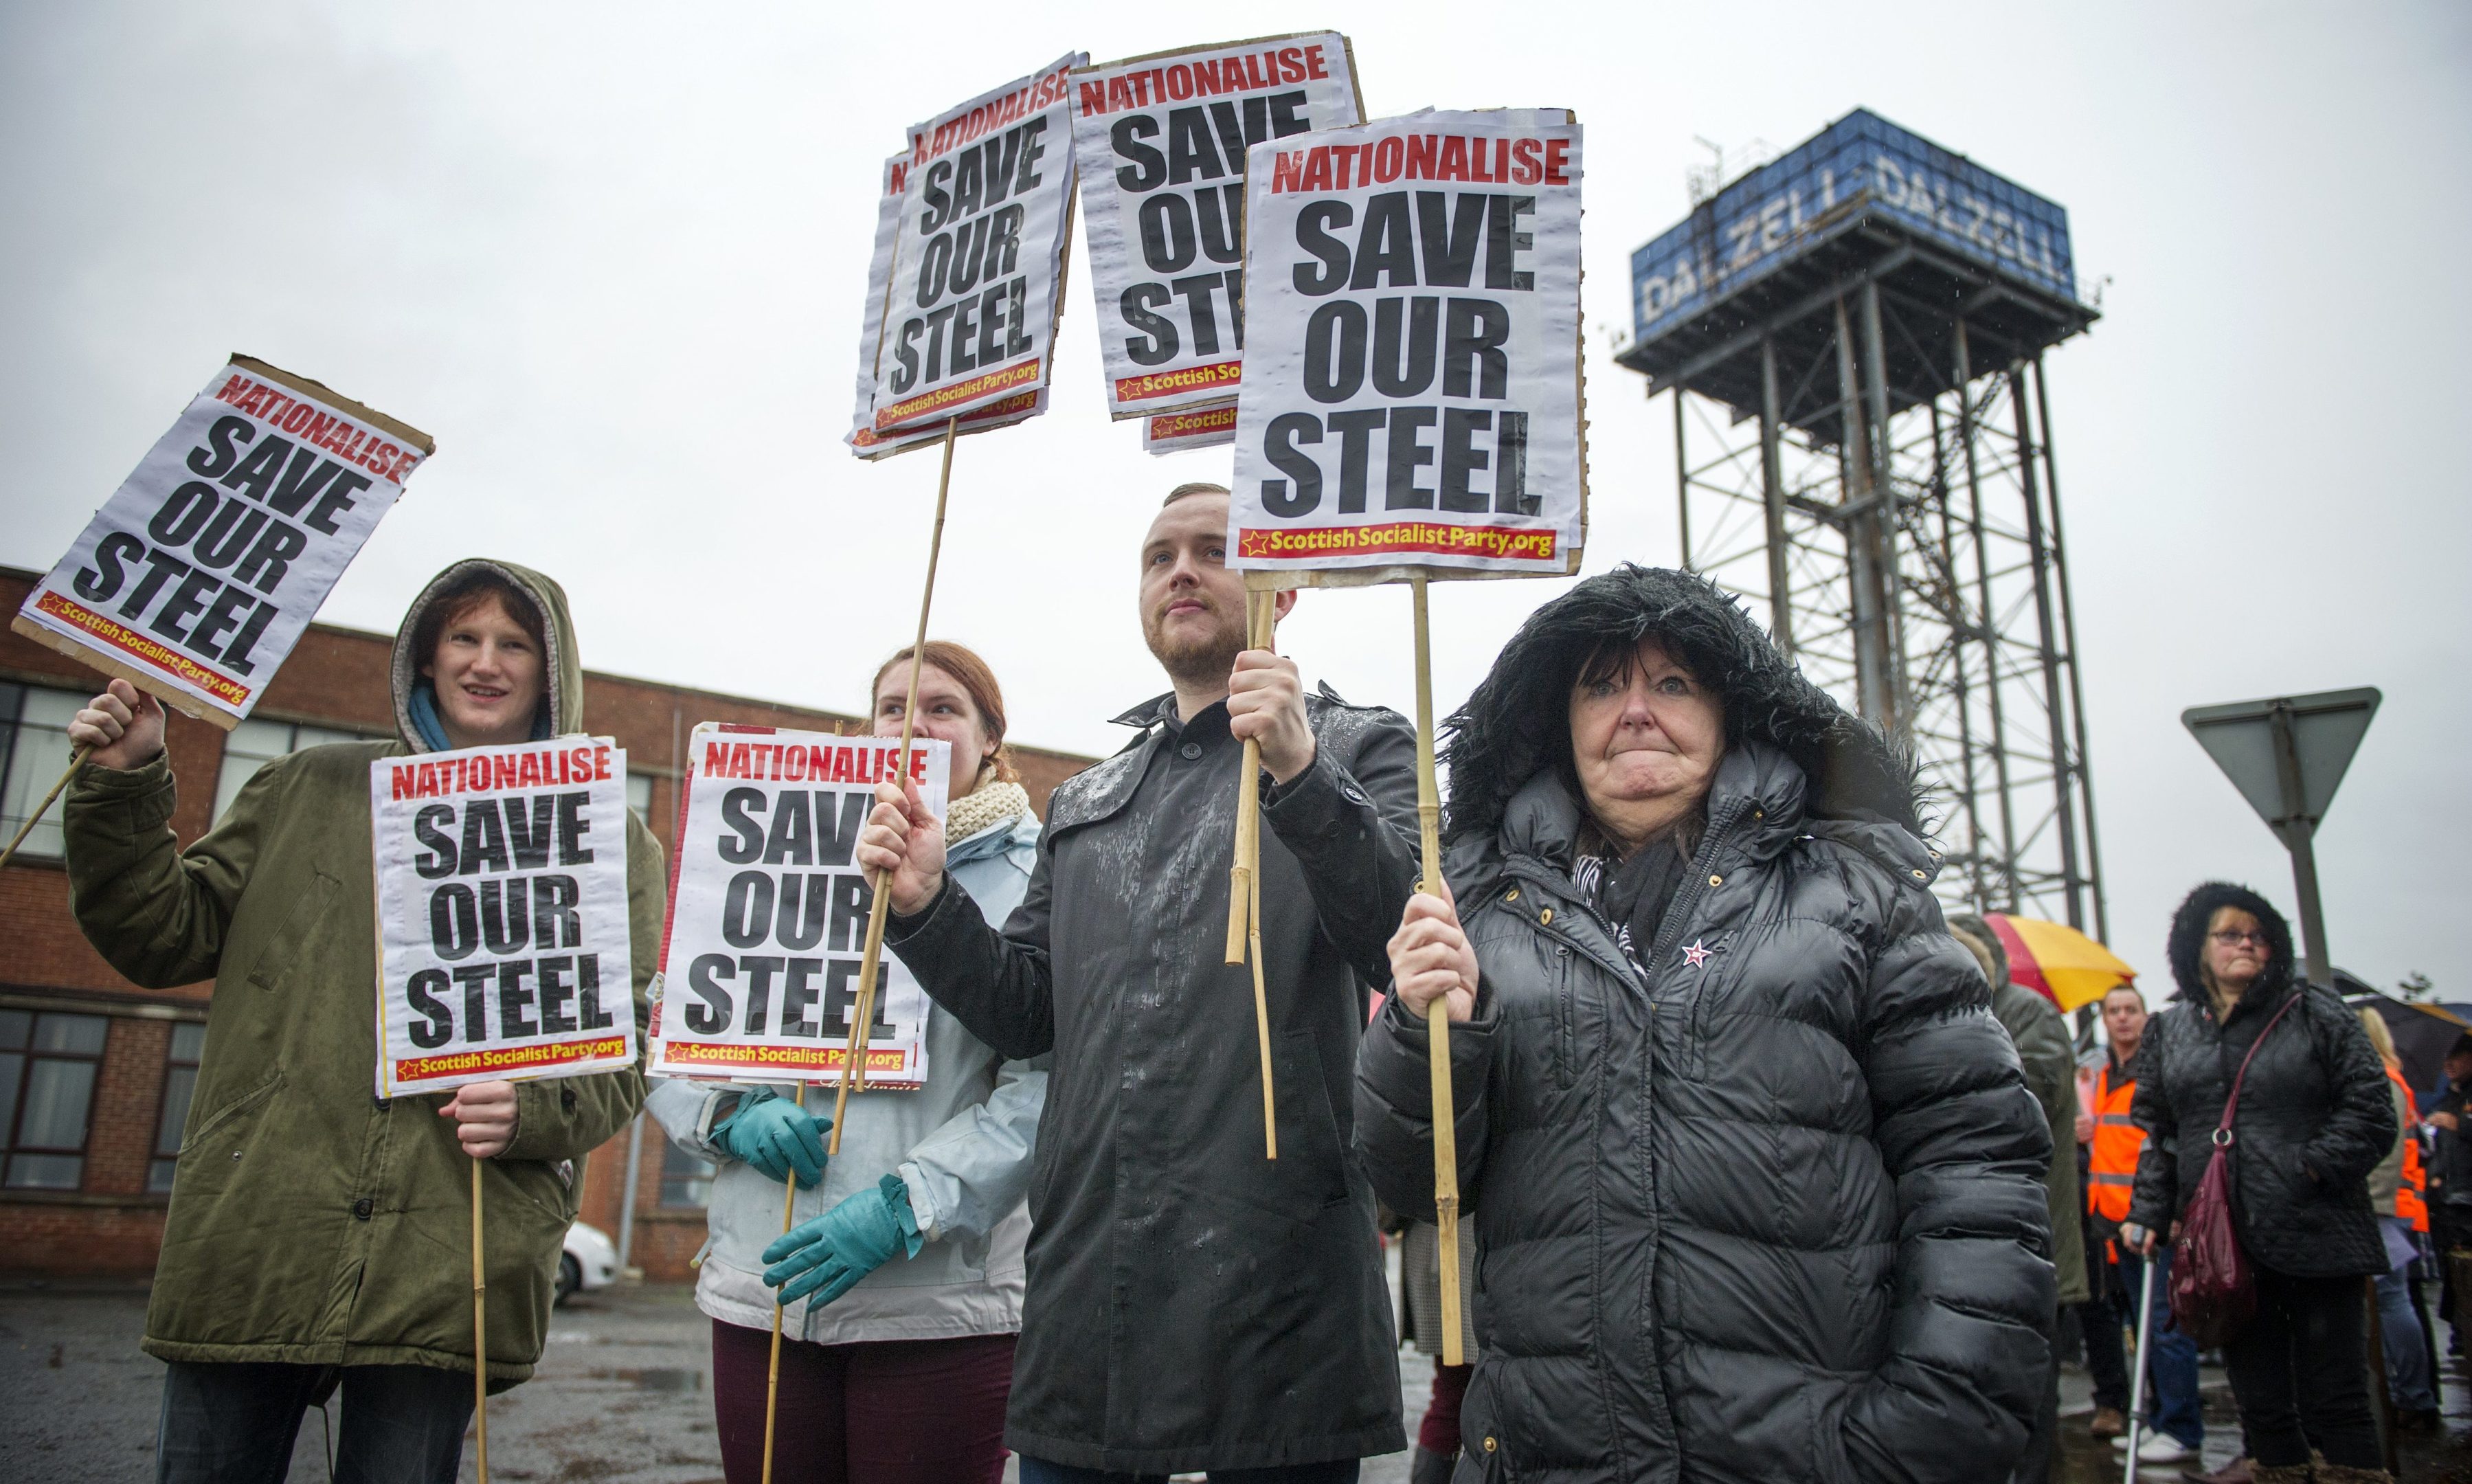 Hundreds of steel workers marching through Motherwell last year in a bid to save their jobs and prevent the closure of the steel industry in Scotland.